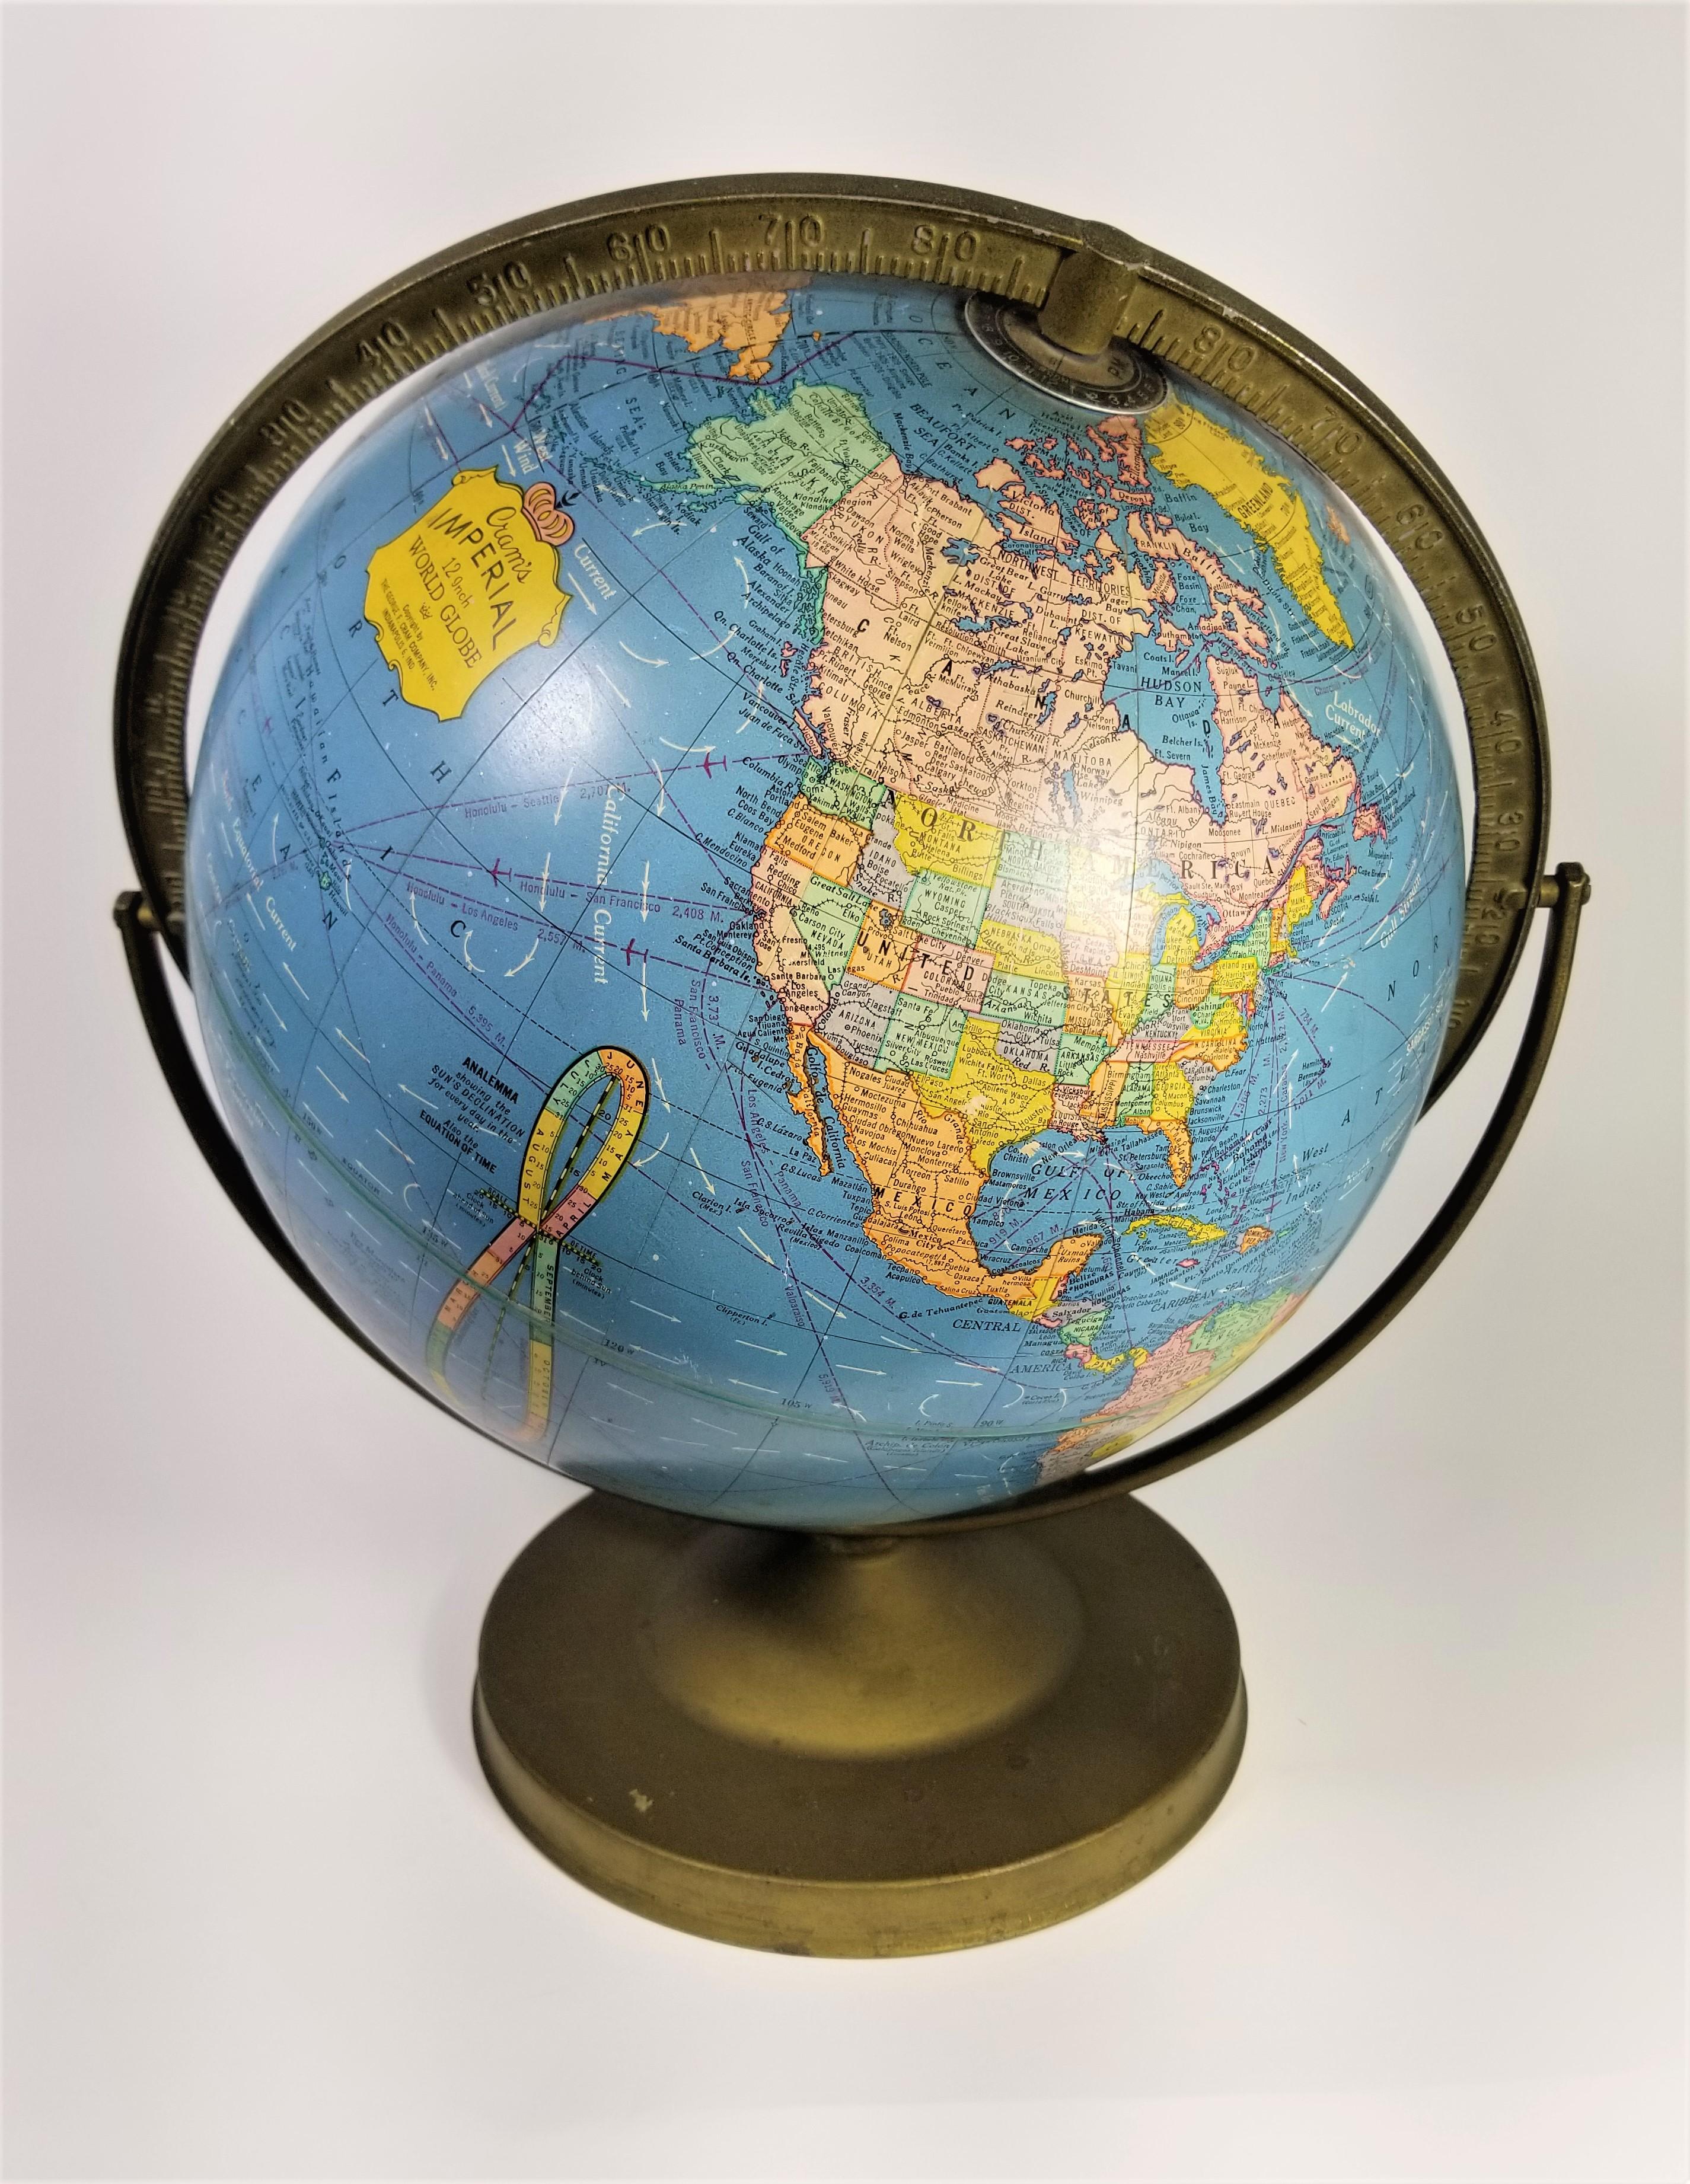 Vintage Cram’s Imperial World Globe. Circa 1950. Actual Globe is 12 inches in diameter. Brass colored base.  